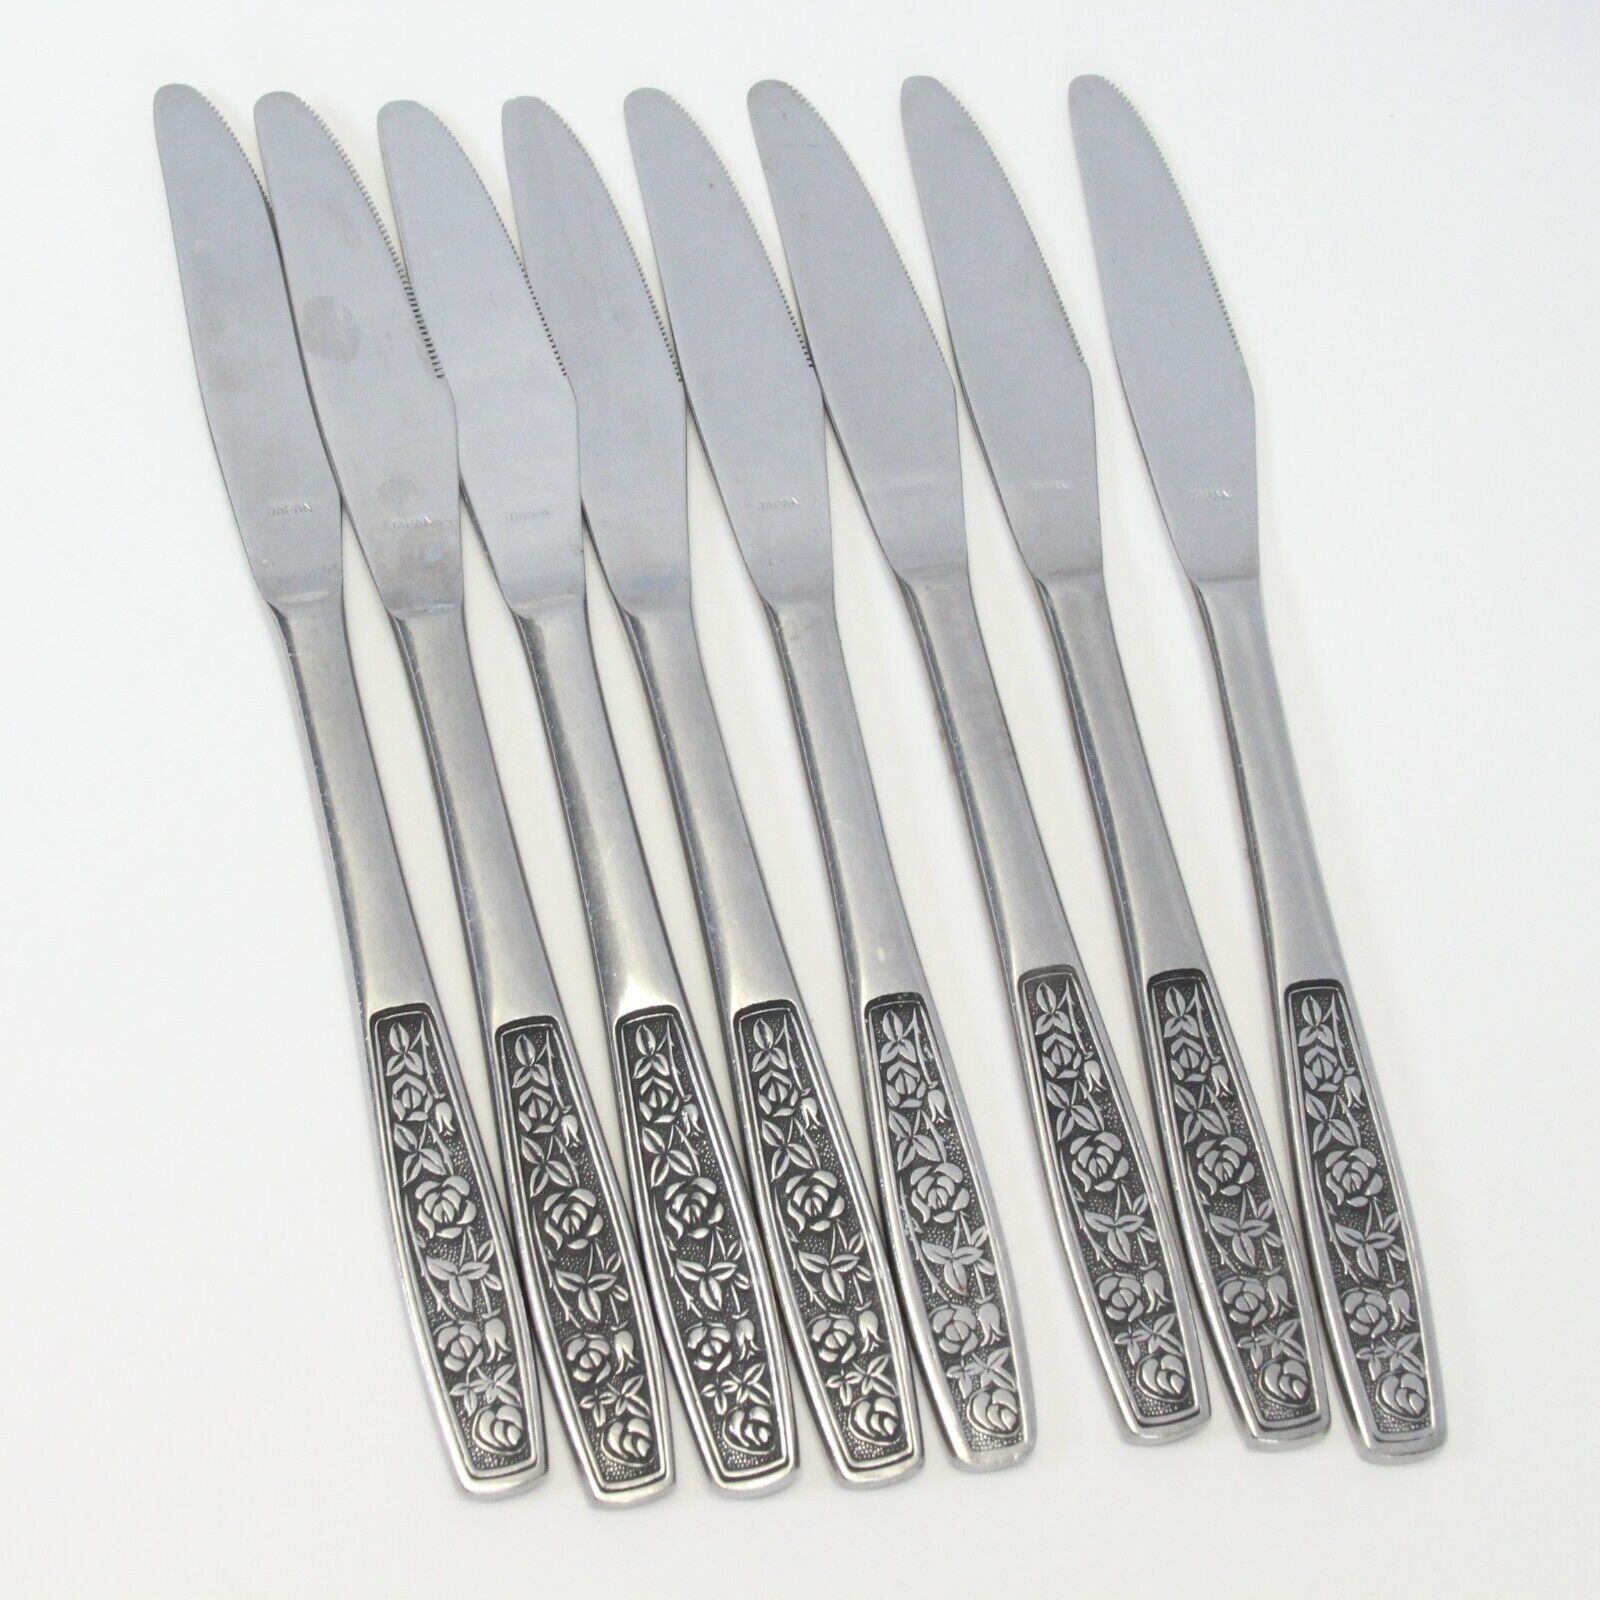 Primary image for Interpur INR28 Dinner Knives 8 5/8" Lot of 8 Stainless